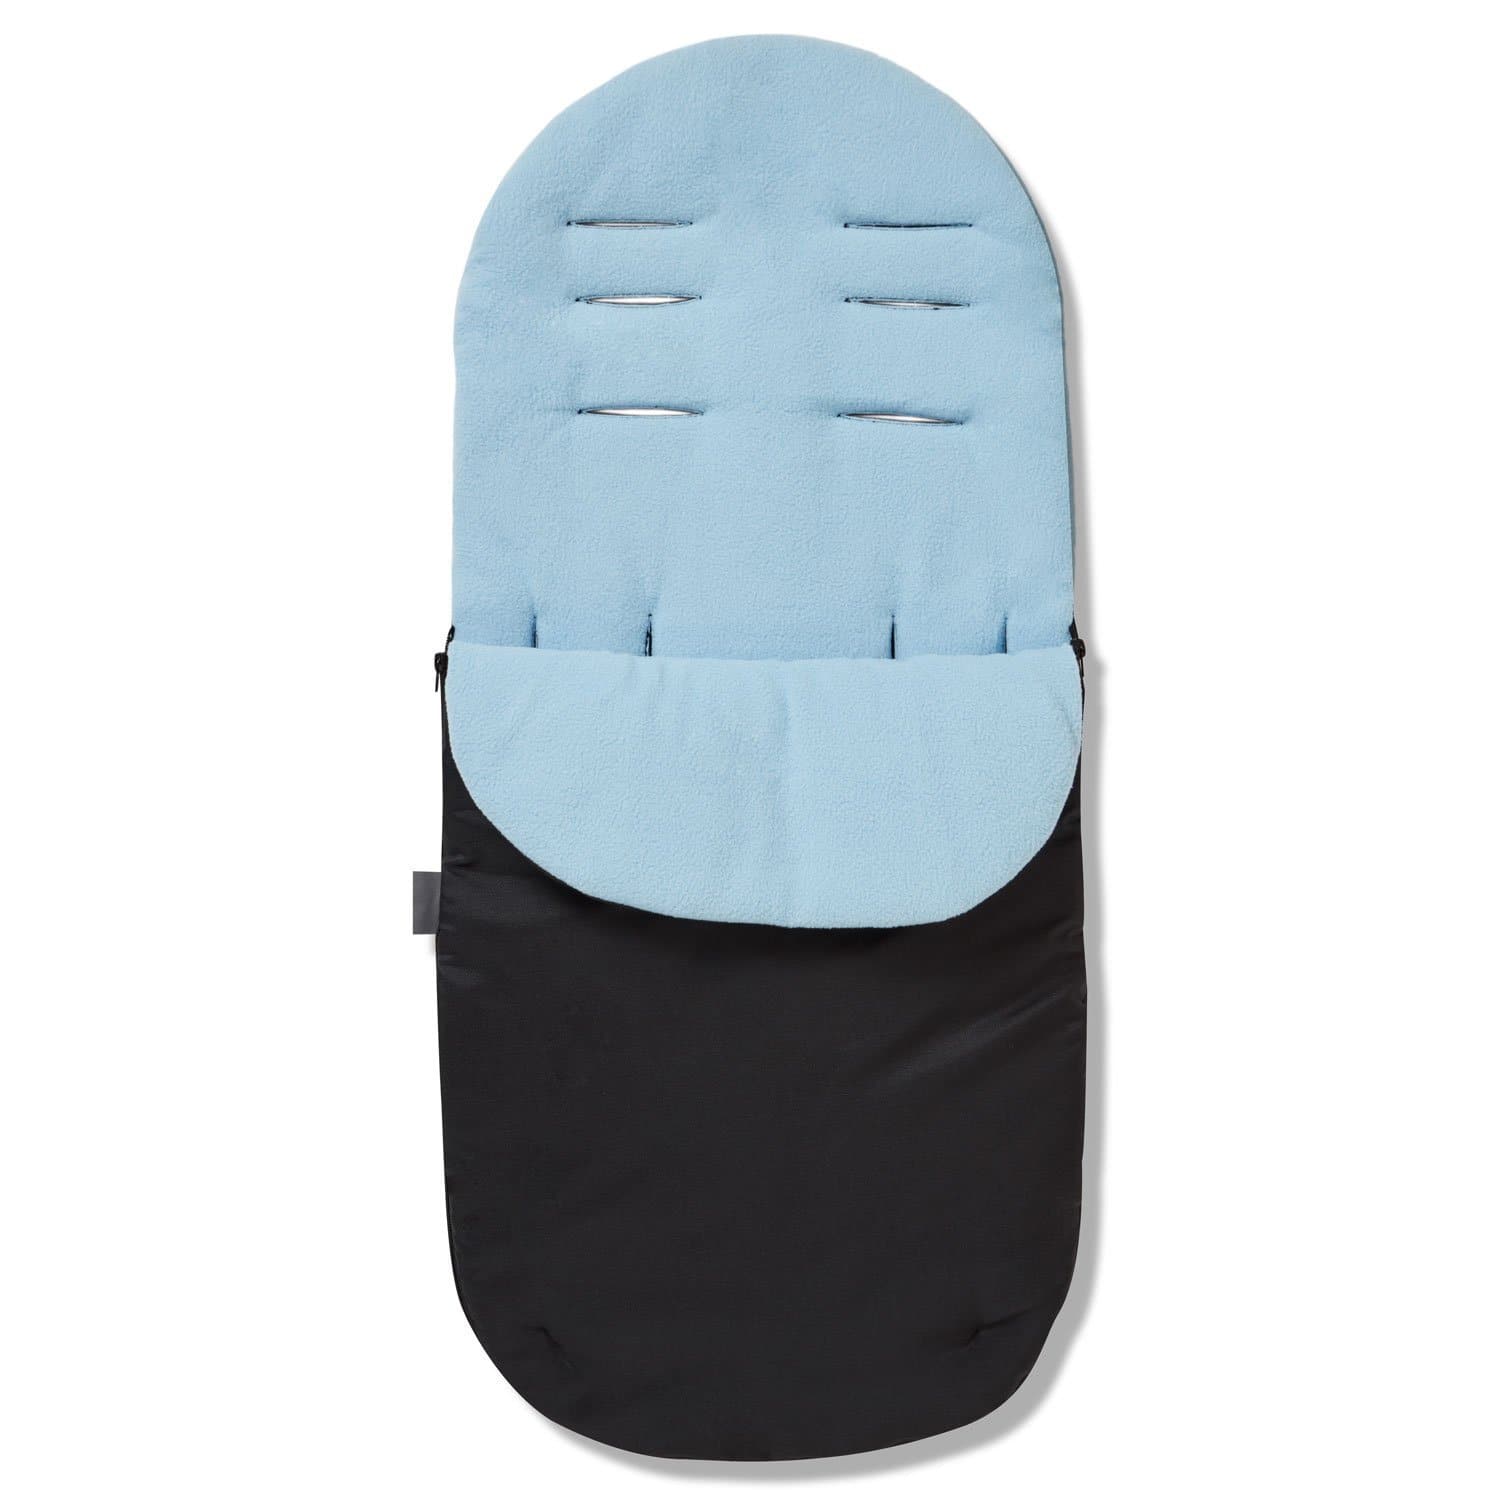 Footmuff / Cosy Toes Compatible with Silver Cross - Light Blue / Fits All Models | For Your Little One